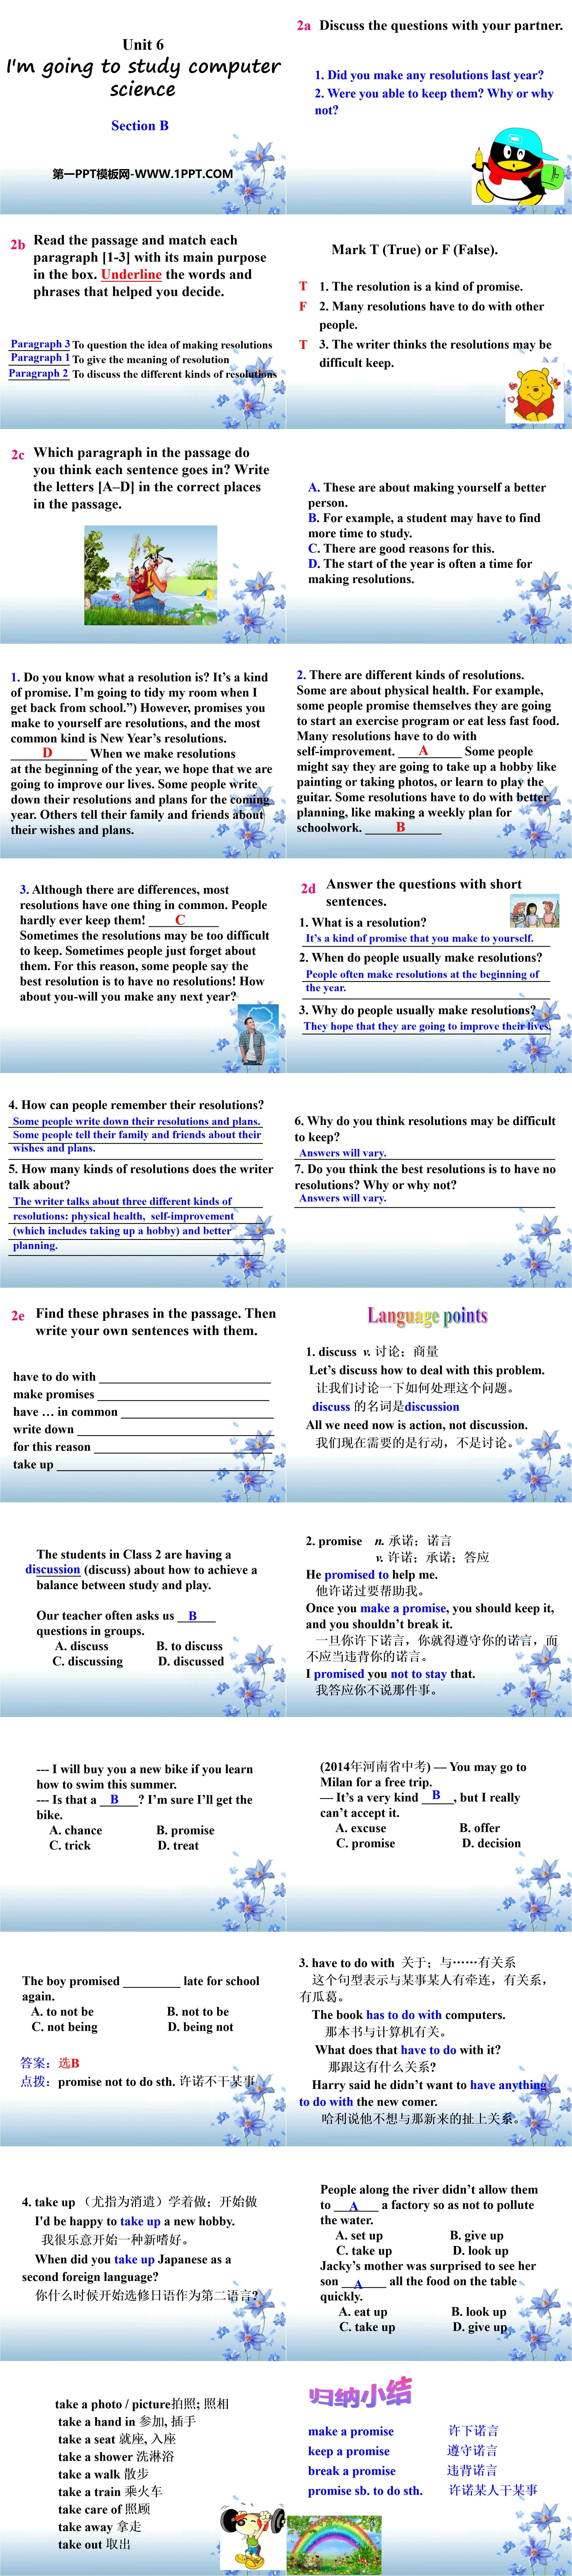 《I'm going to study computer science》PPT课件23
（2）